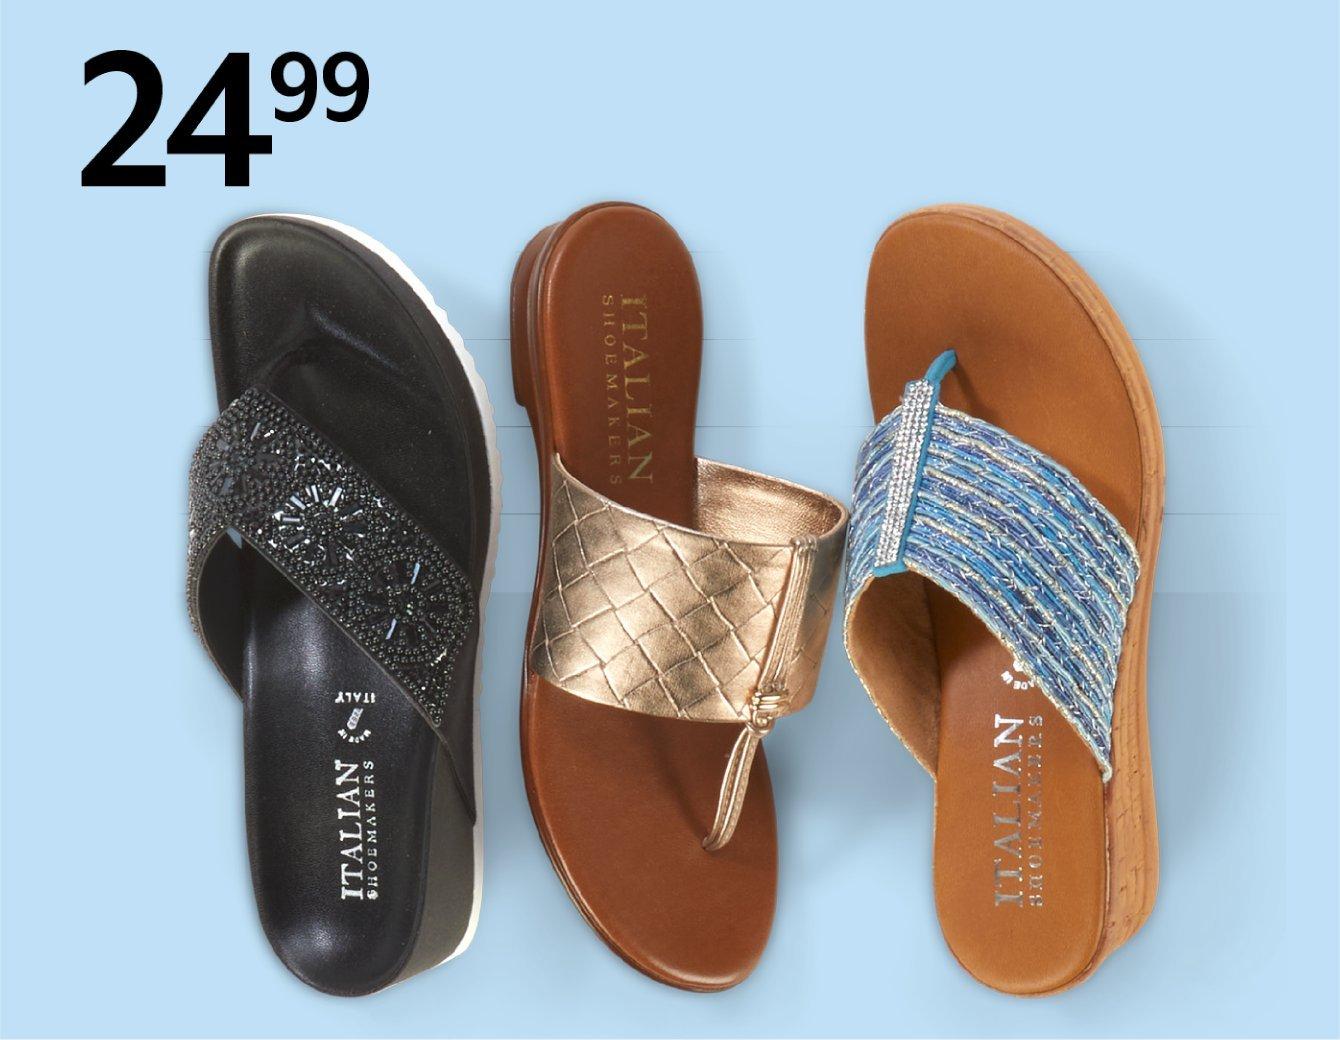 24.99 Fashion sandals for the women